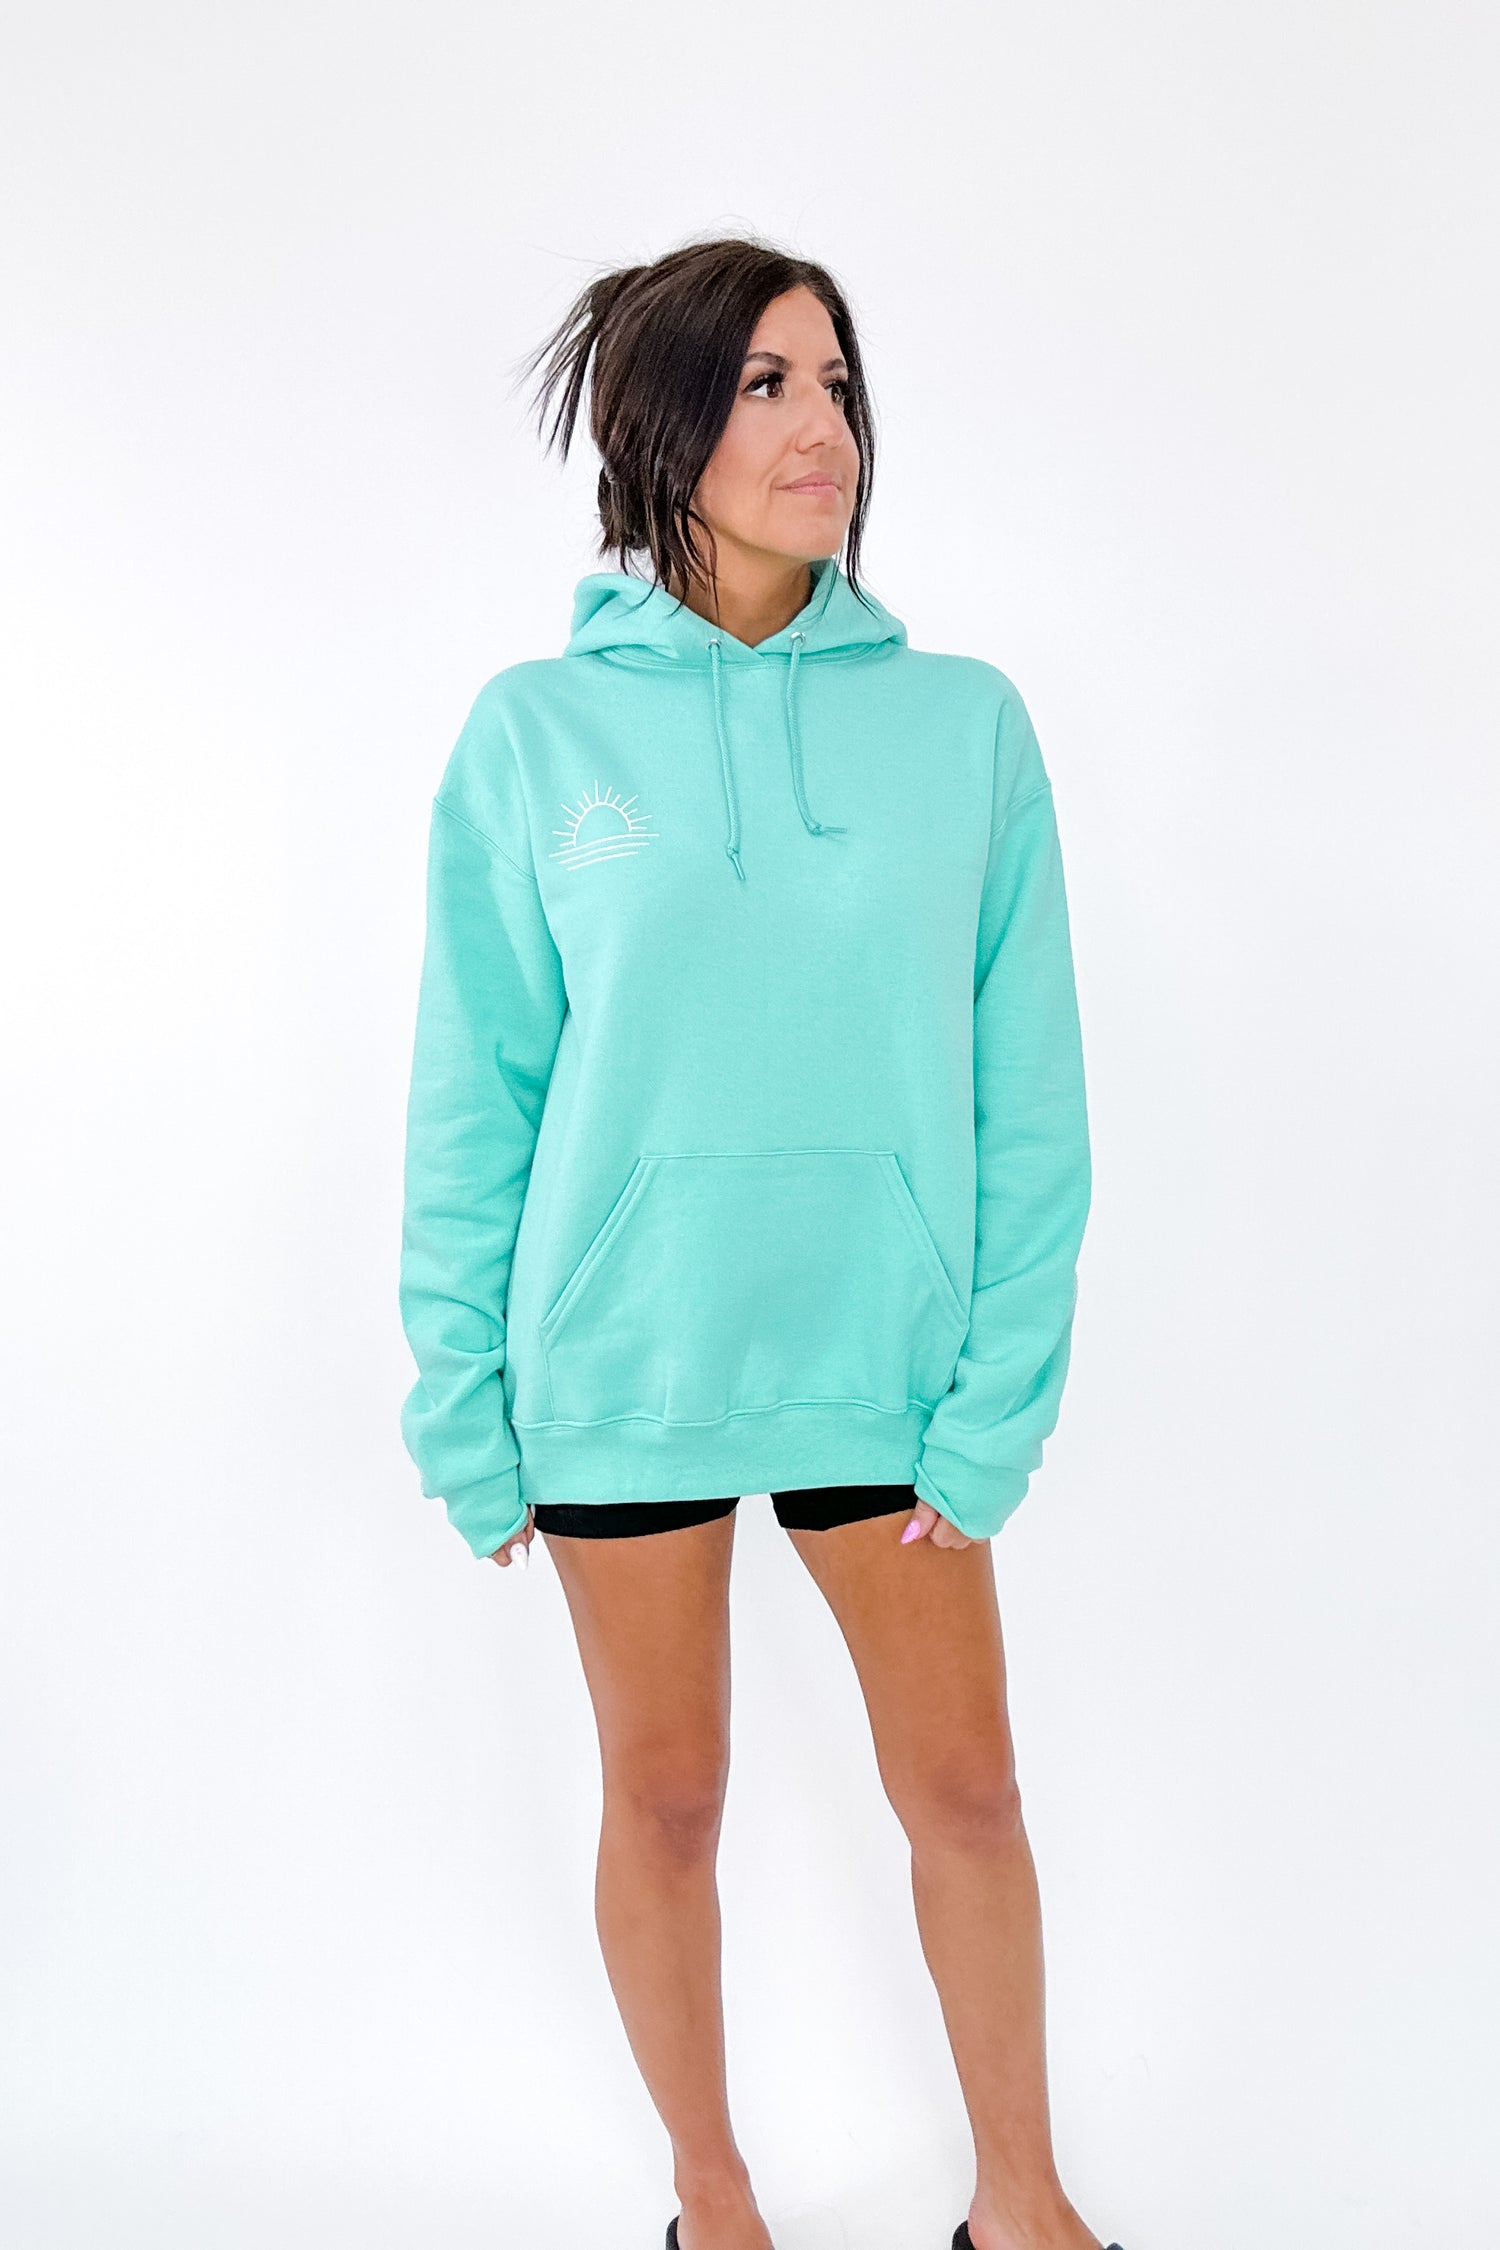 GOOD VIBES ONLY HOODIE IN MINT